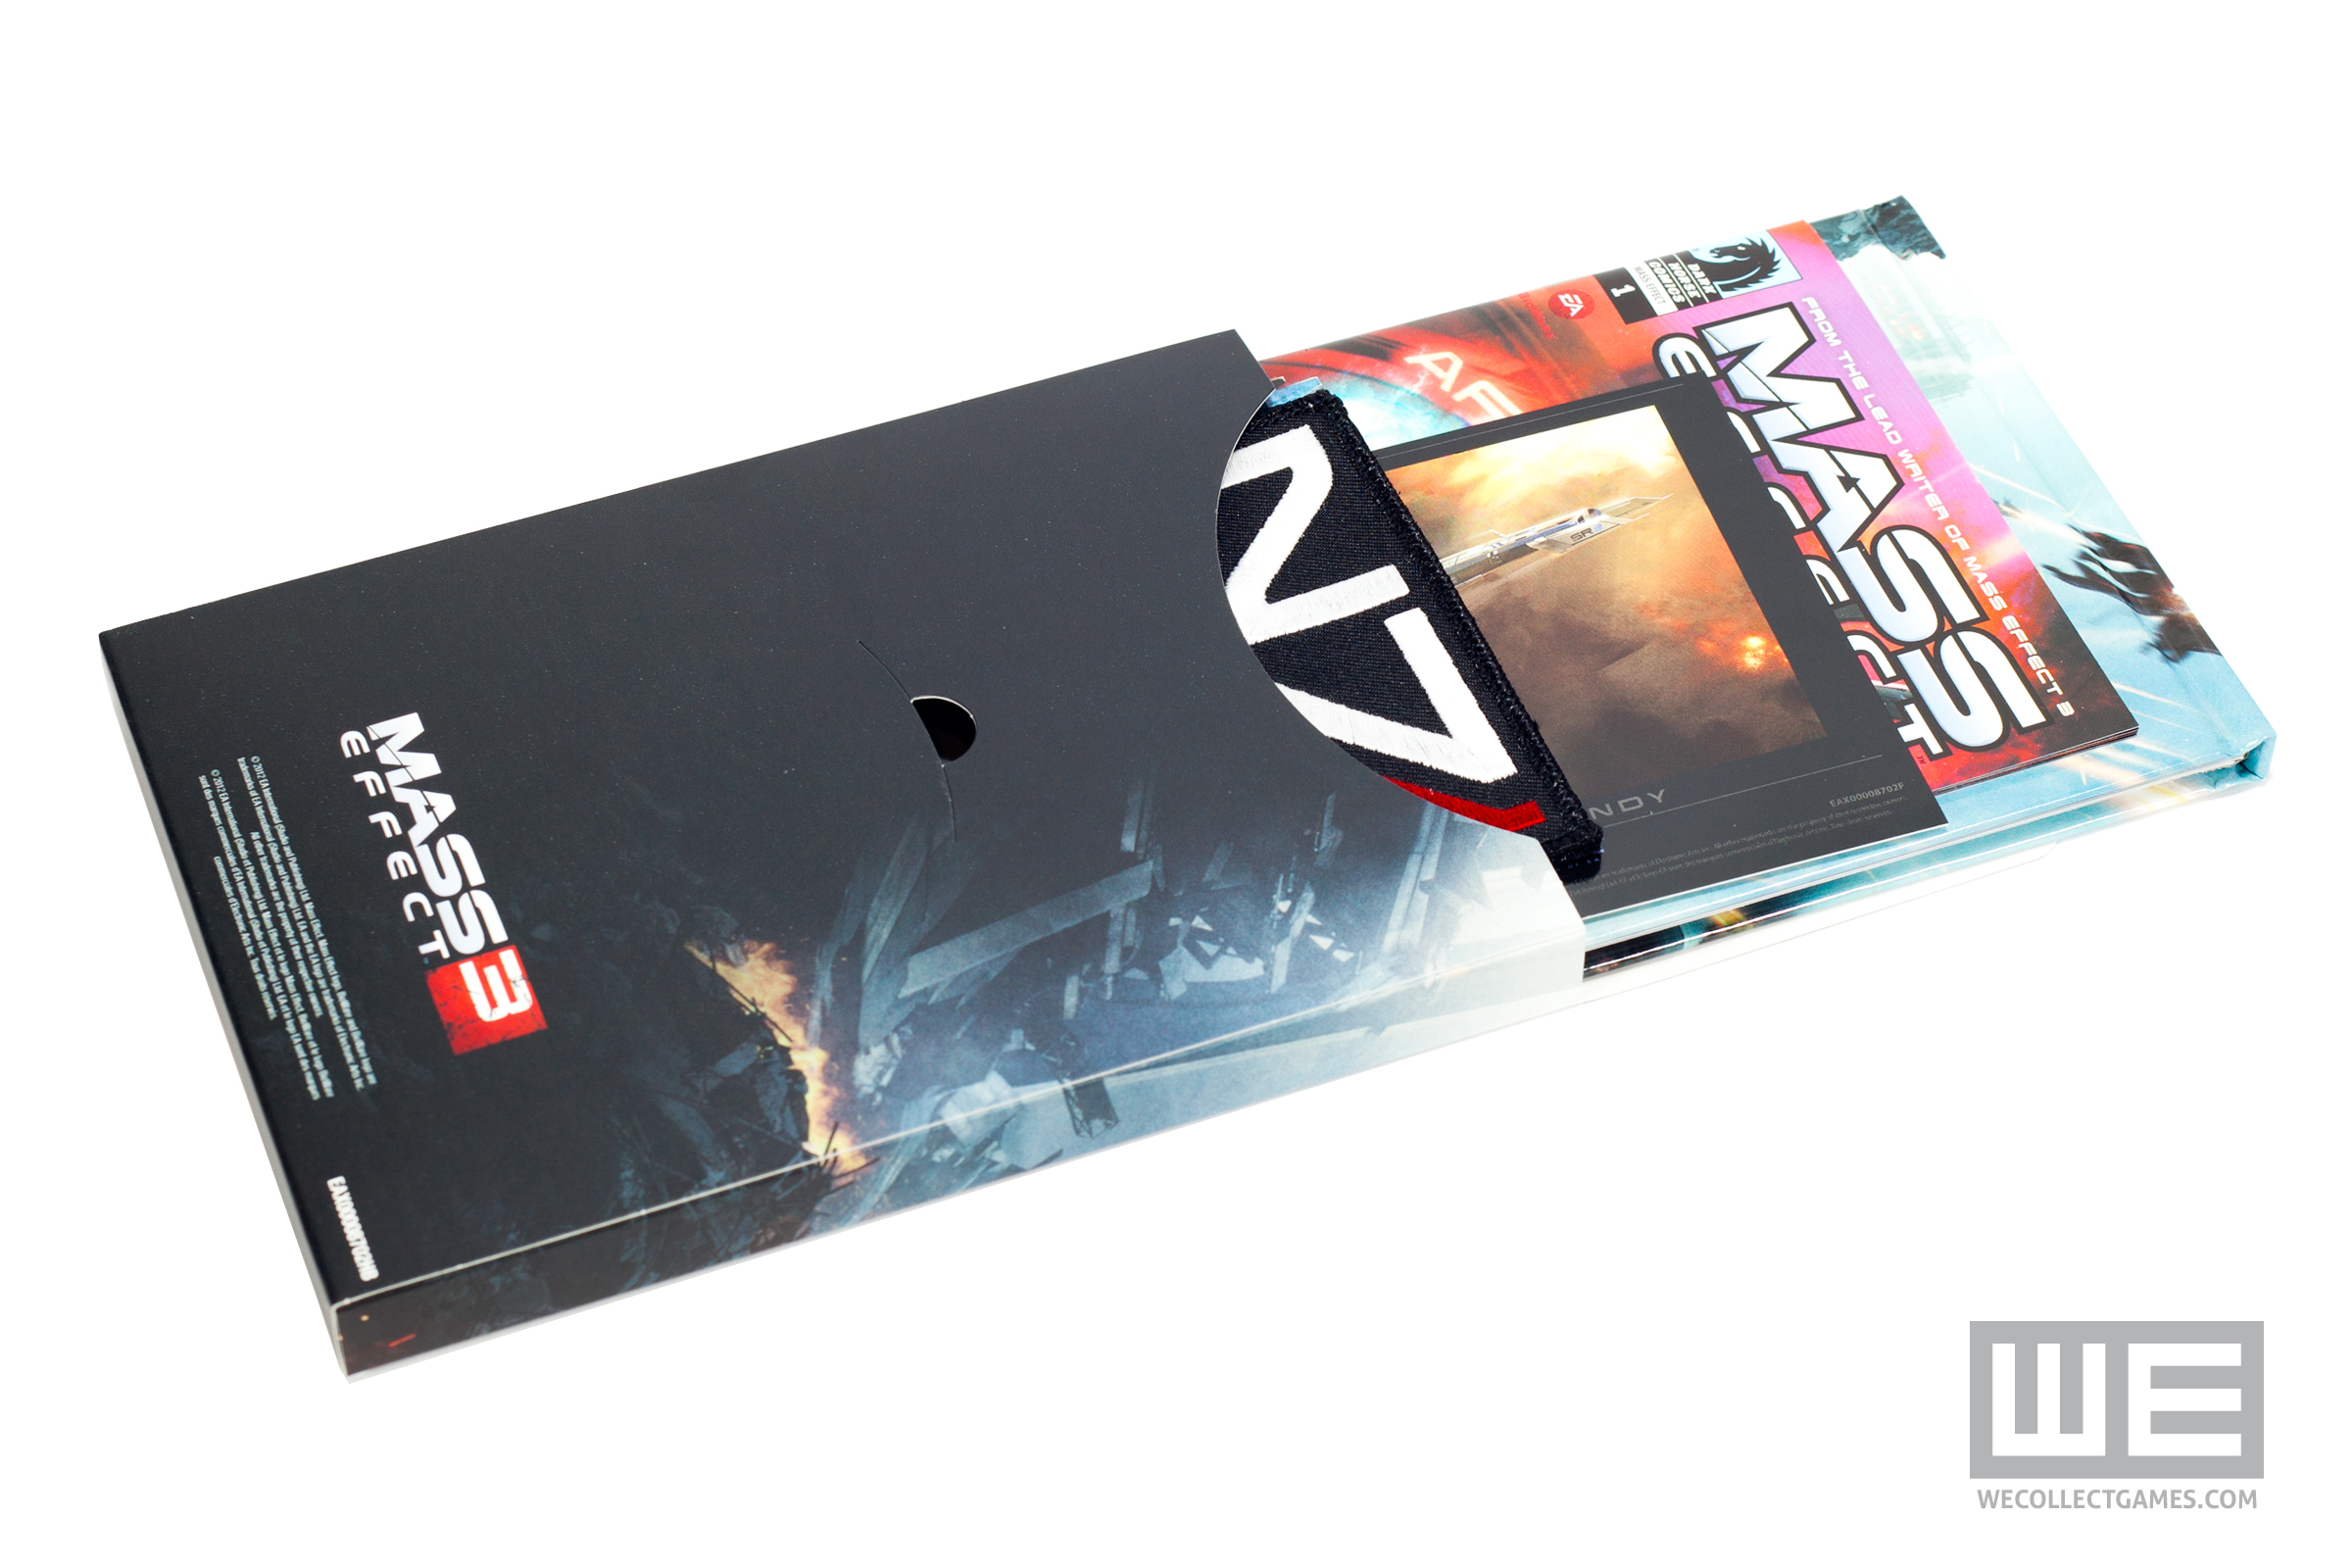 Next piece of the pack is the Mass Effect 3 Steelbook, which is almost the ...